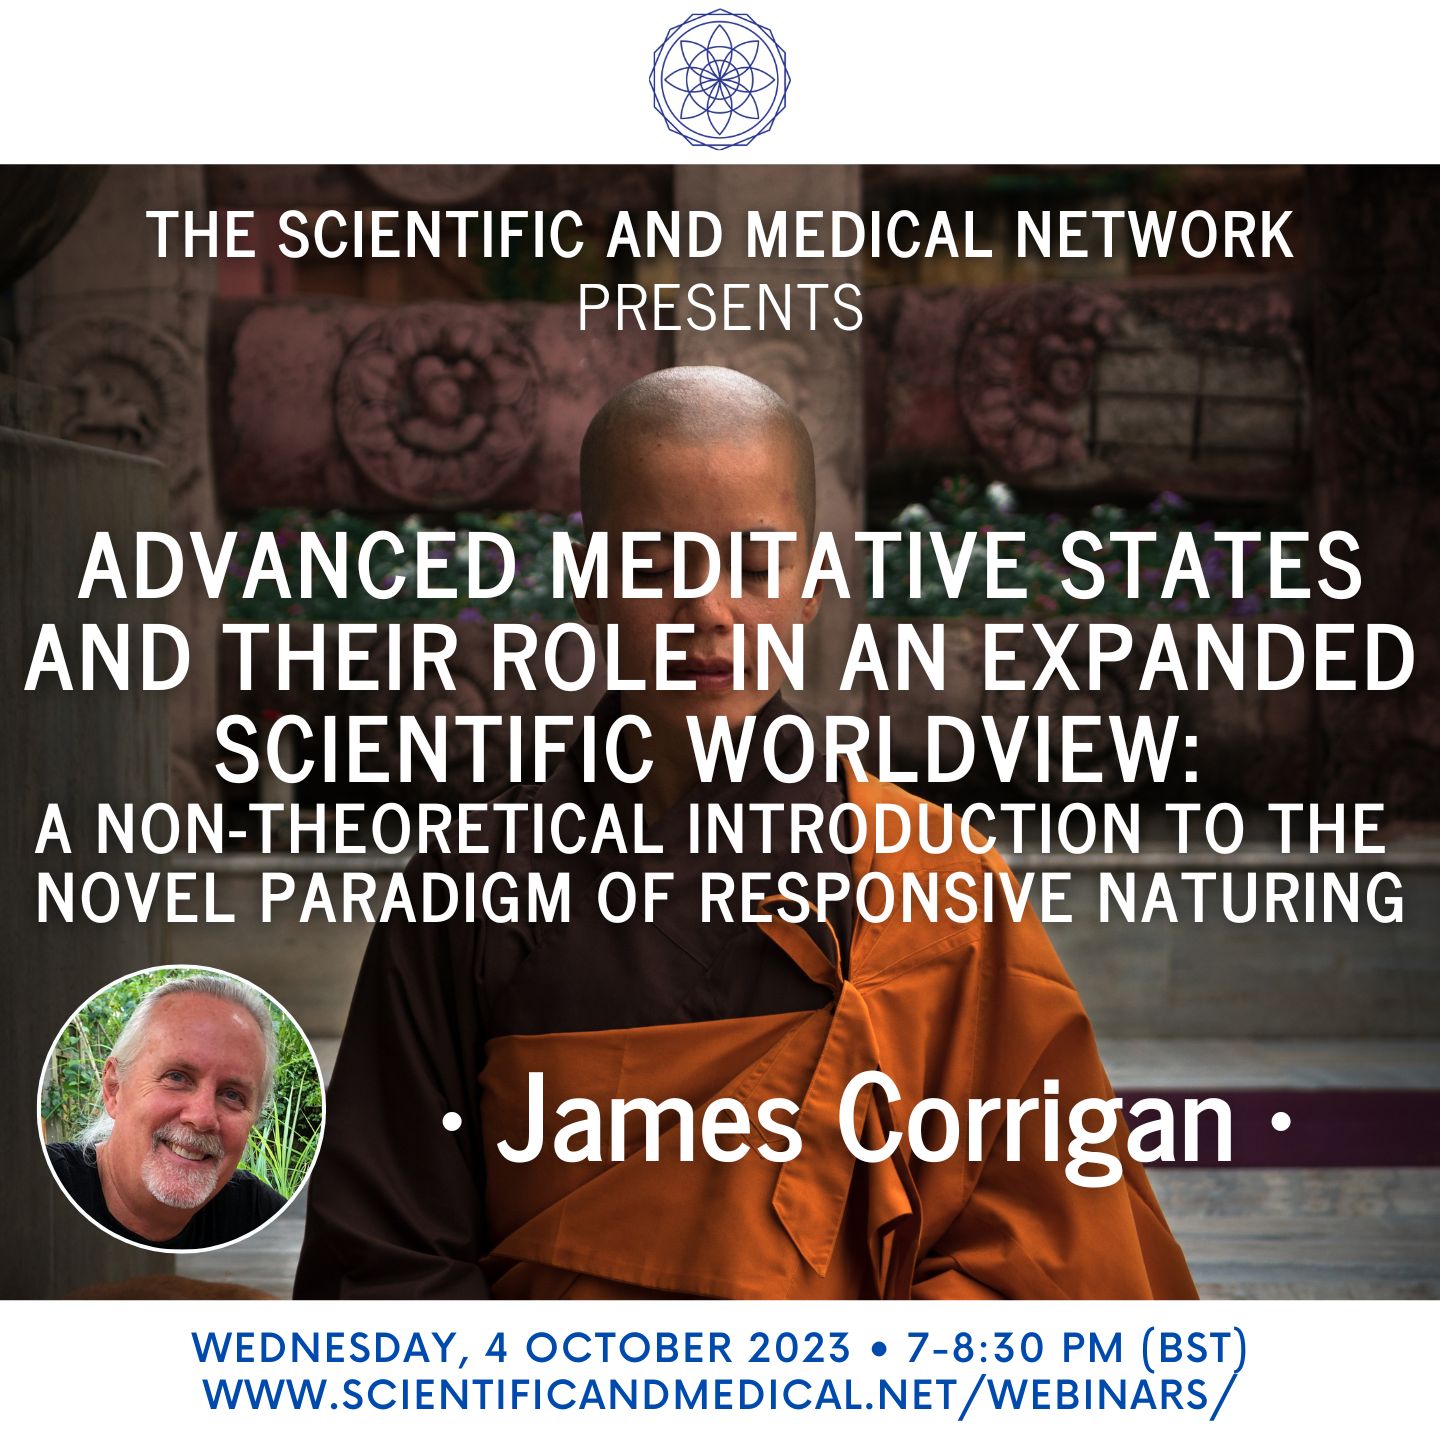 James Corrigan – Advanced Meditative States and their Role in an Expanded Scientific Worldview